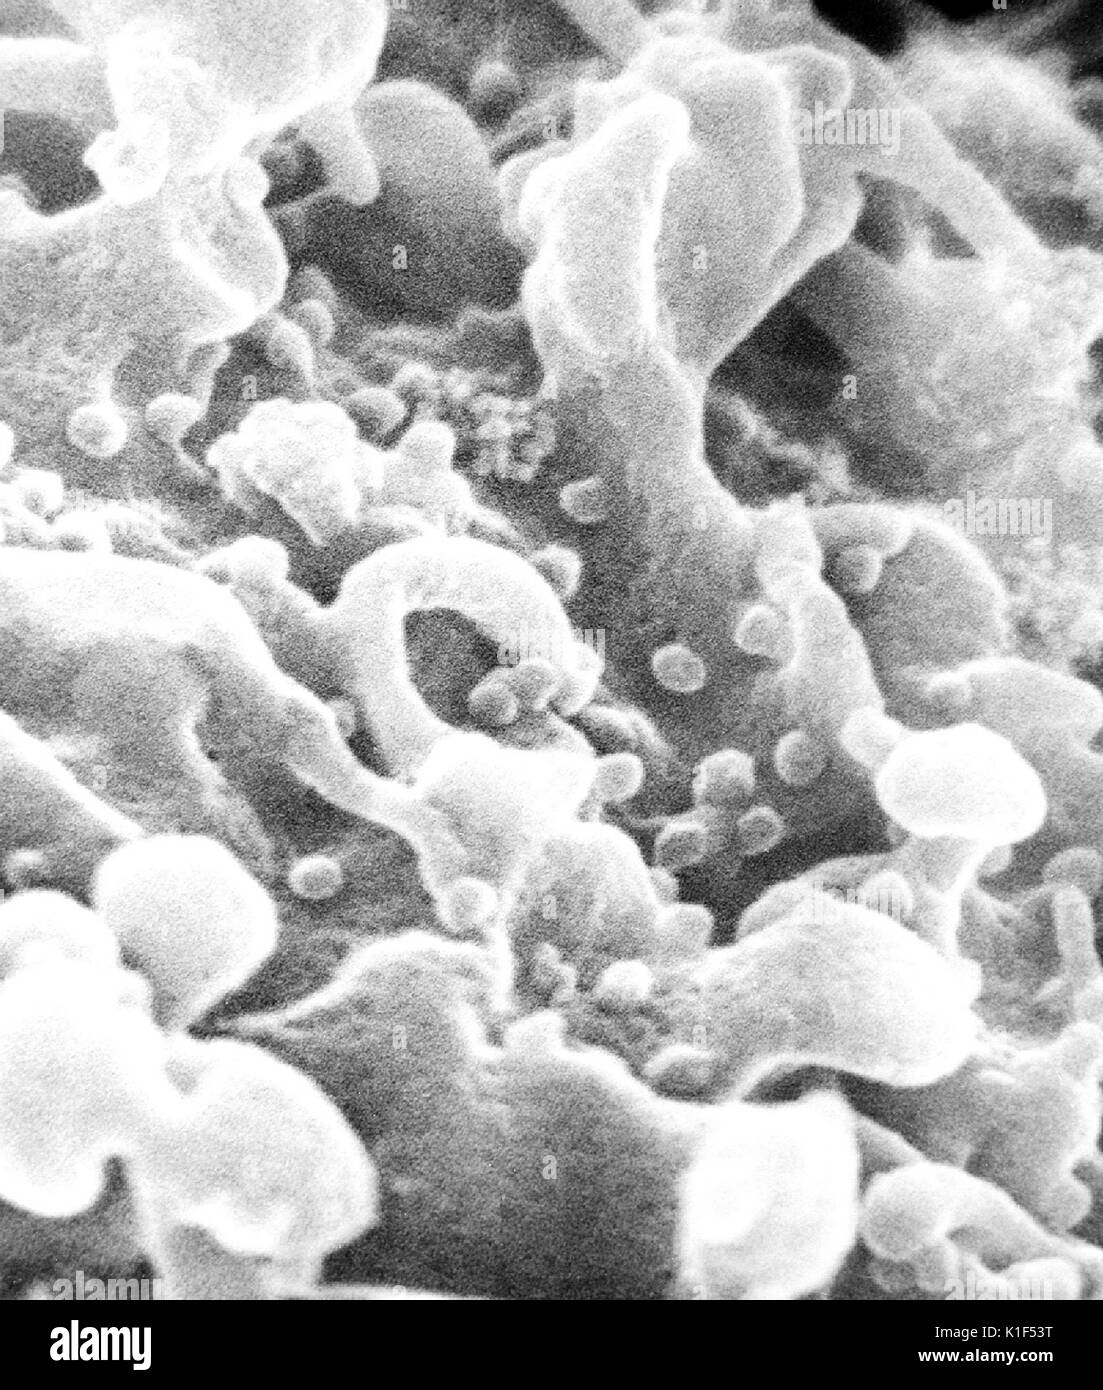 Scanning electron micrograph of human immunodeficiency virus (HIV), grown in cultured lymphocytes. Virions are seen as small spheres on the surface of the cells. Image courtesy CDC/Cynthia Goldsmith, P. Feorino, E. L. Palmer, W. R. McManus, 1984. Stock Photo